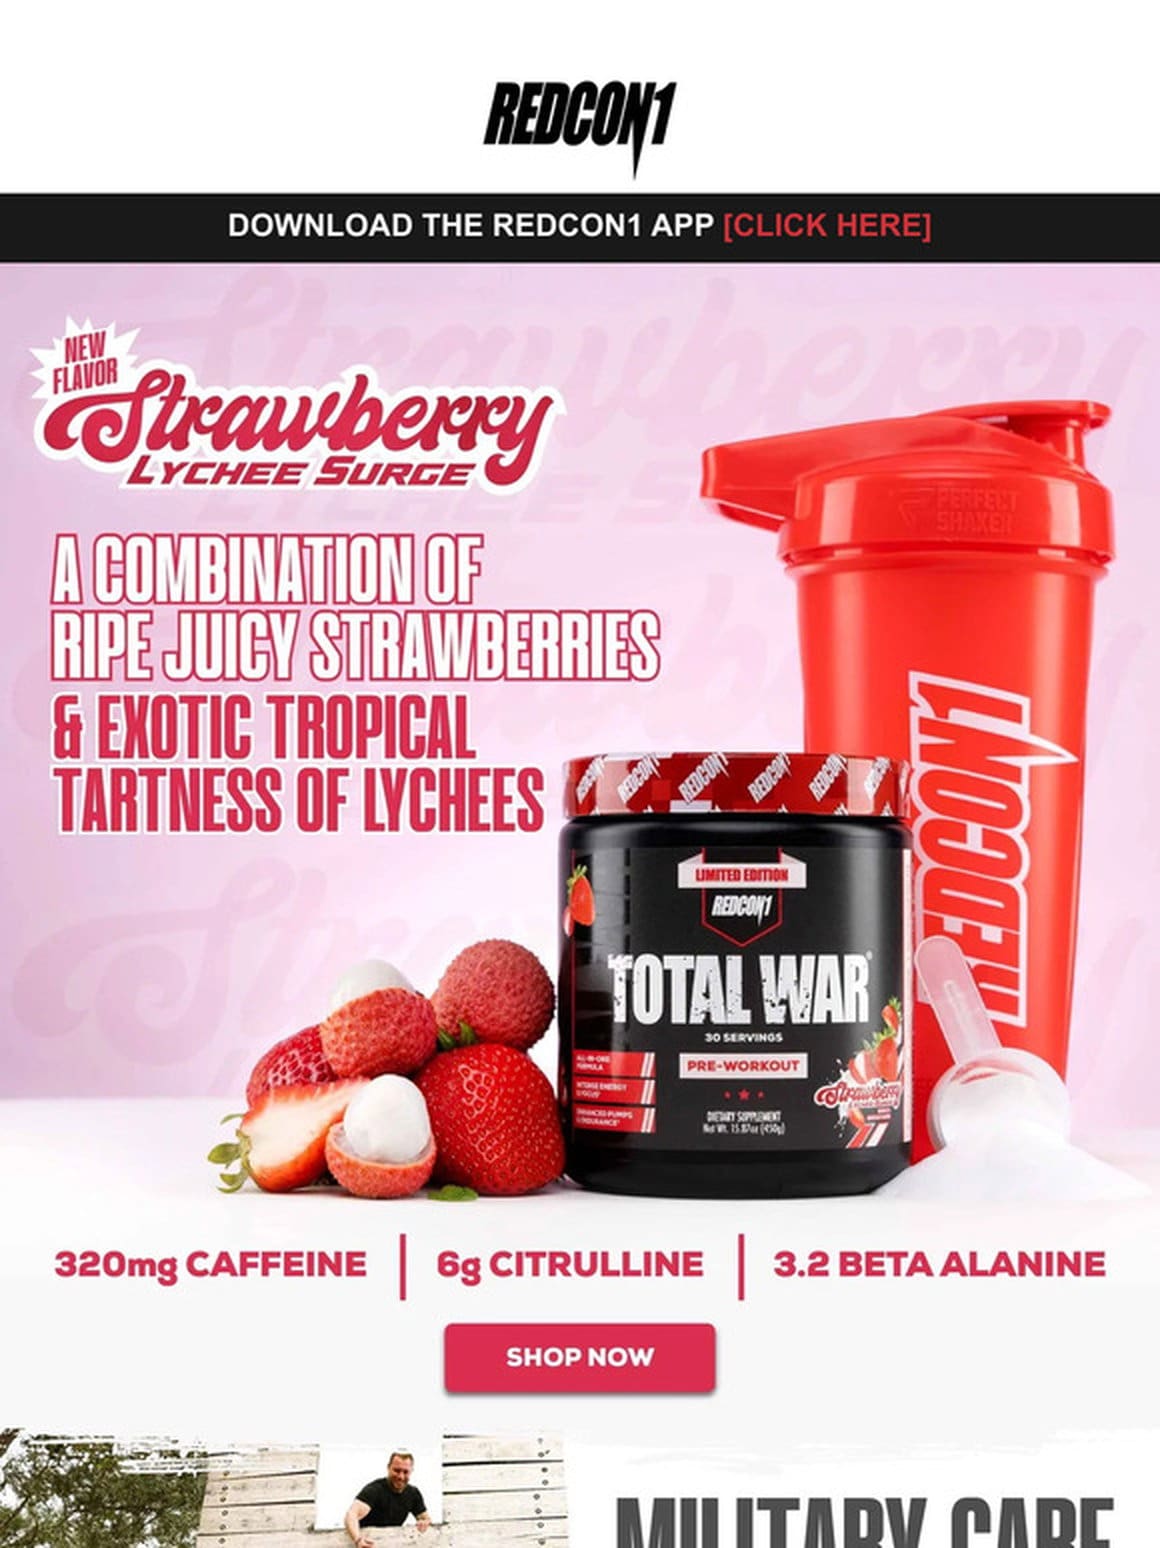 [New flavor drop] TOTAL WAR in Strawberry Lychee